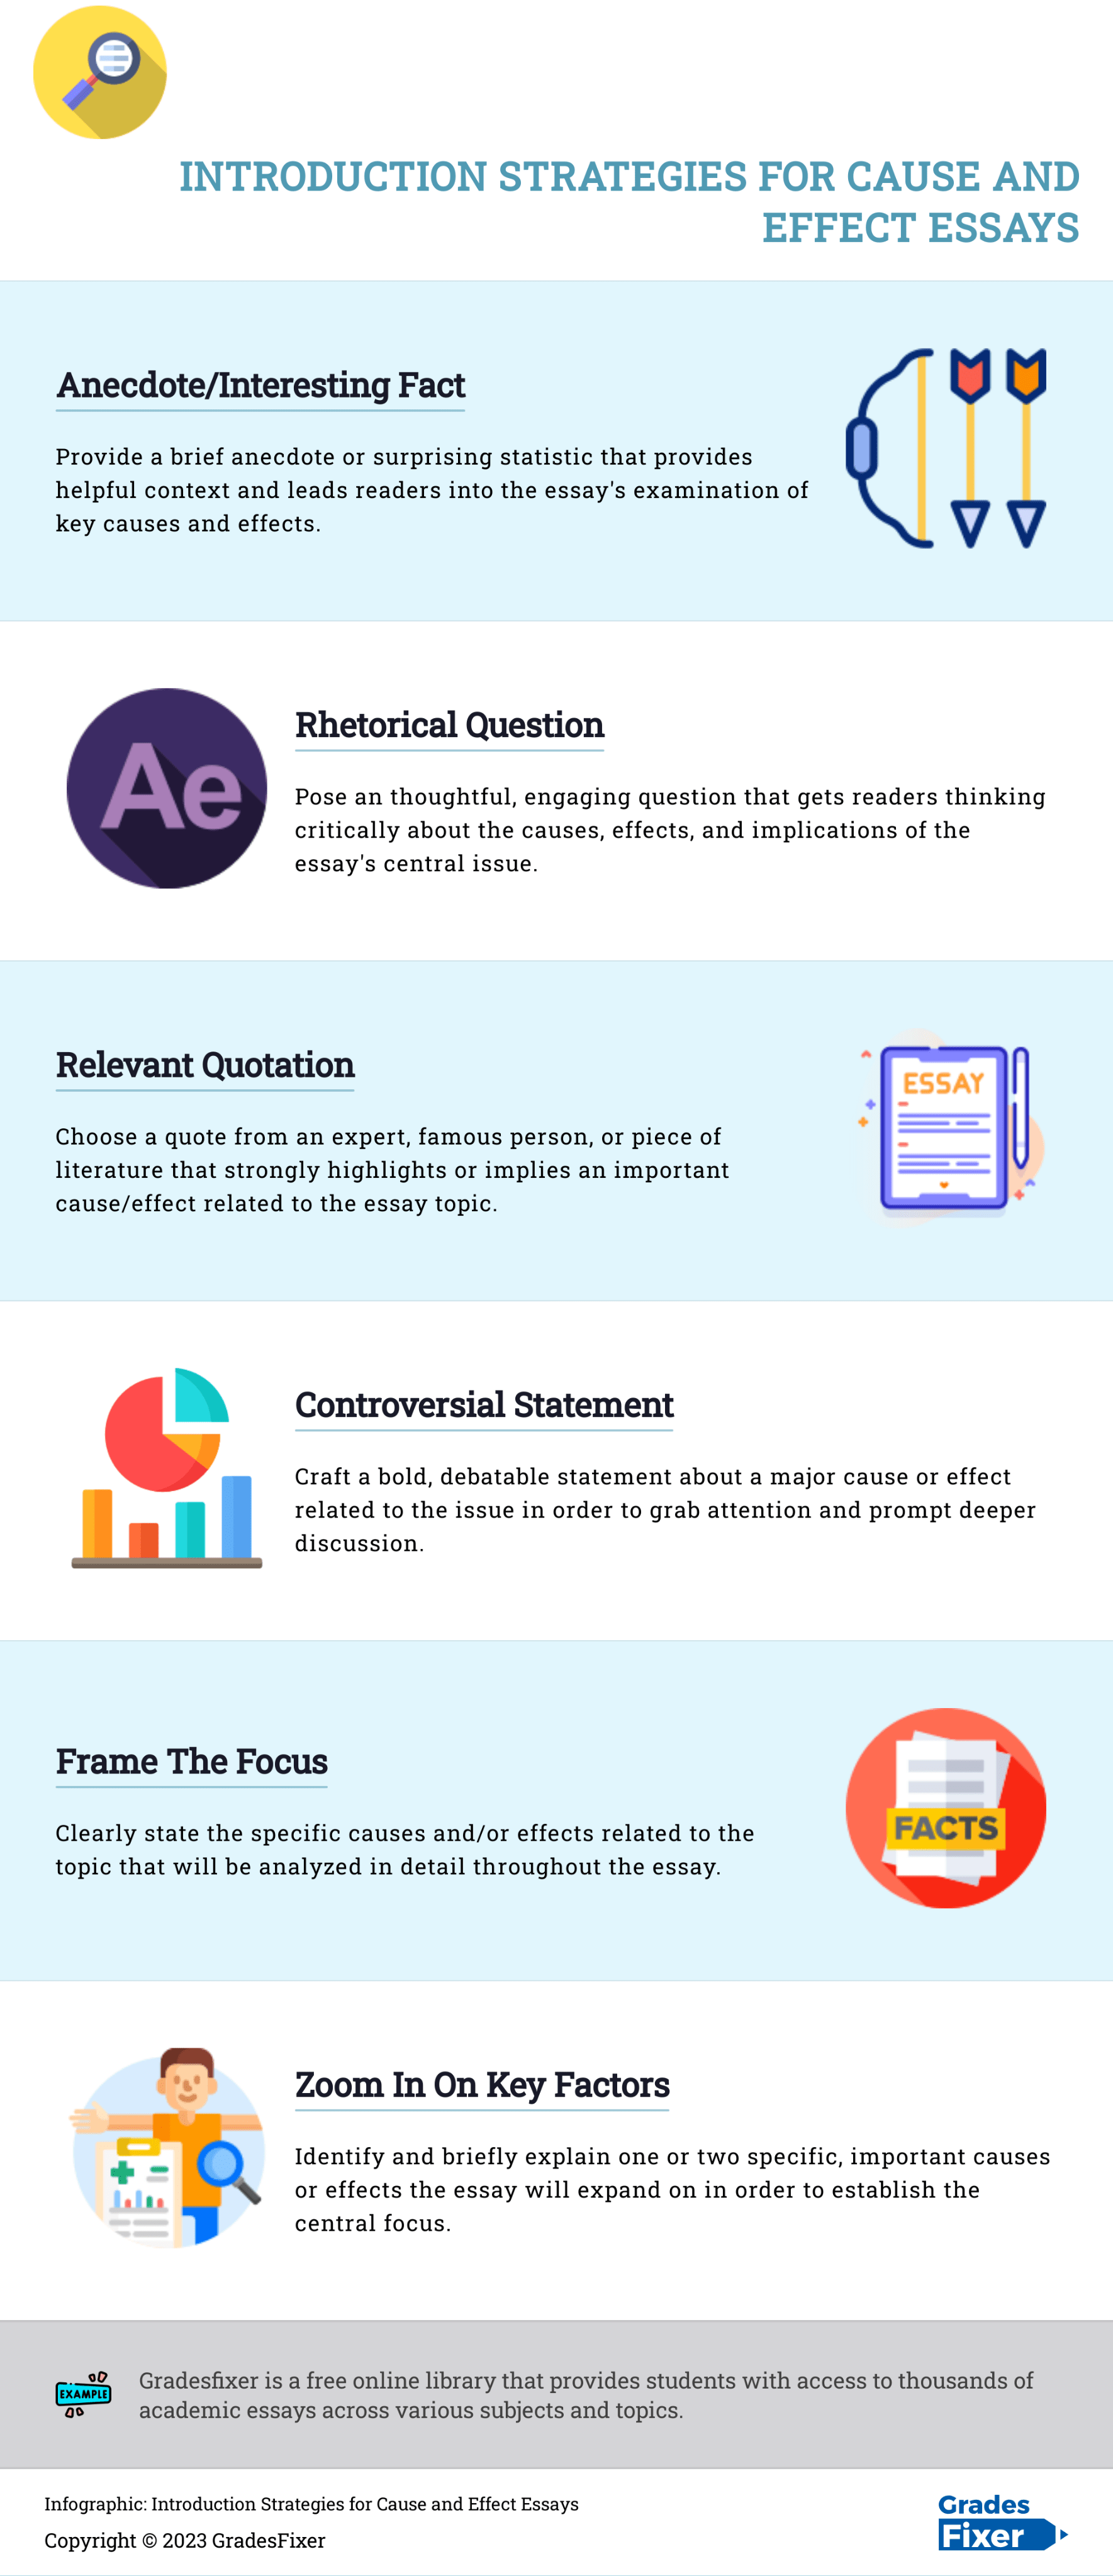 Infographic Introduction Strategies for Cause and Effect Essay